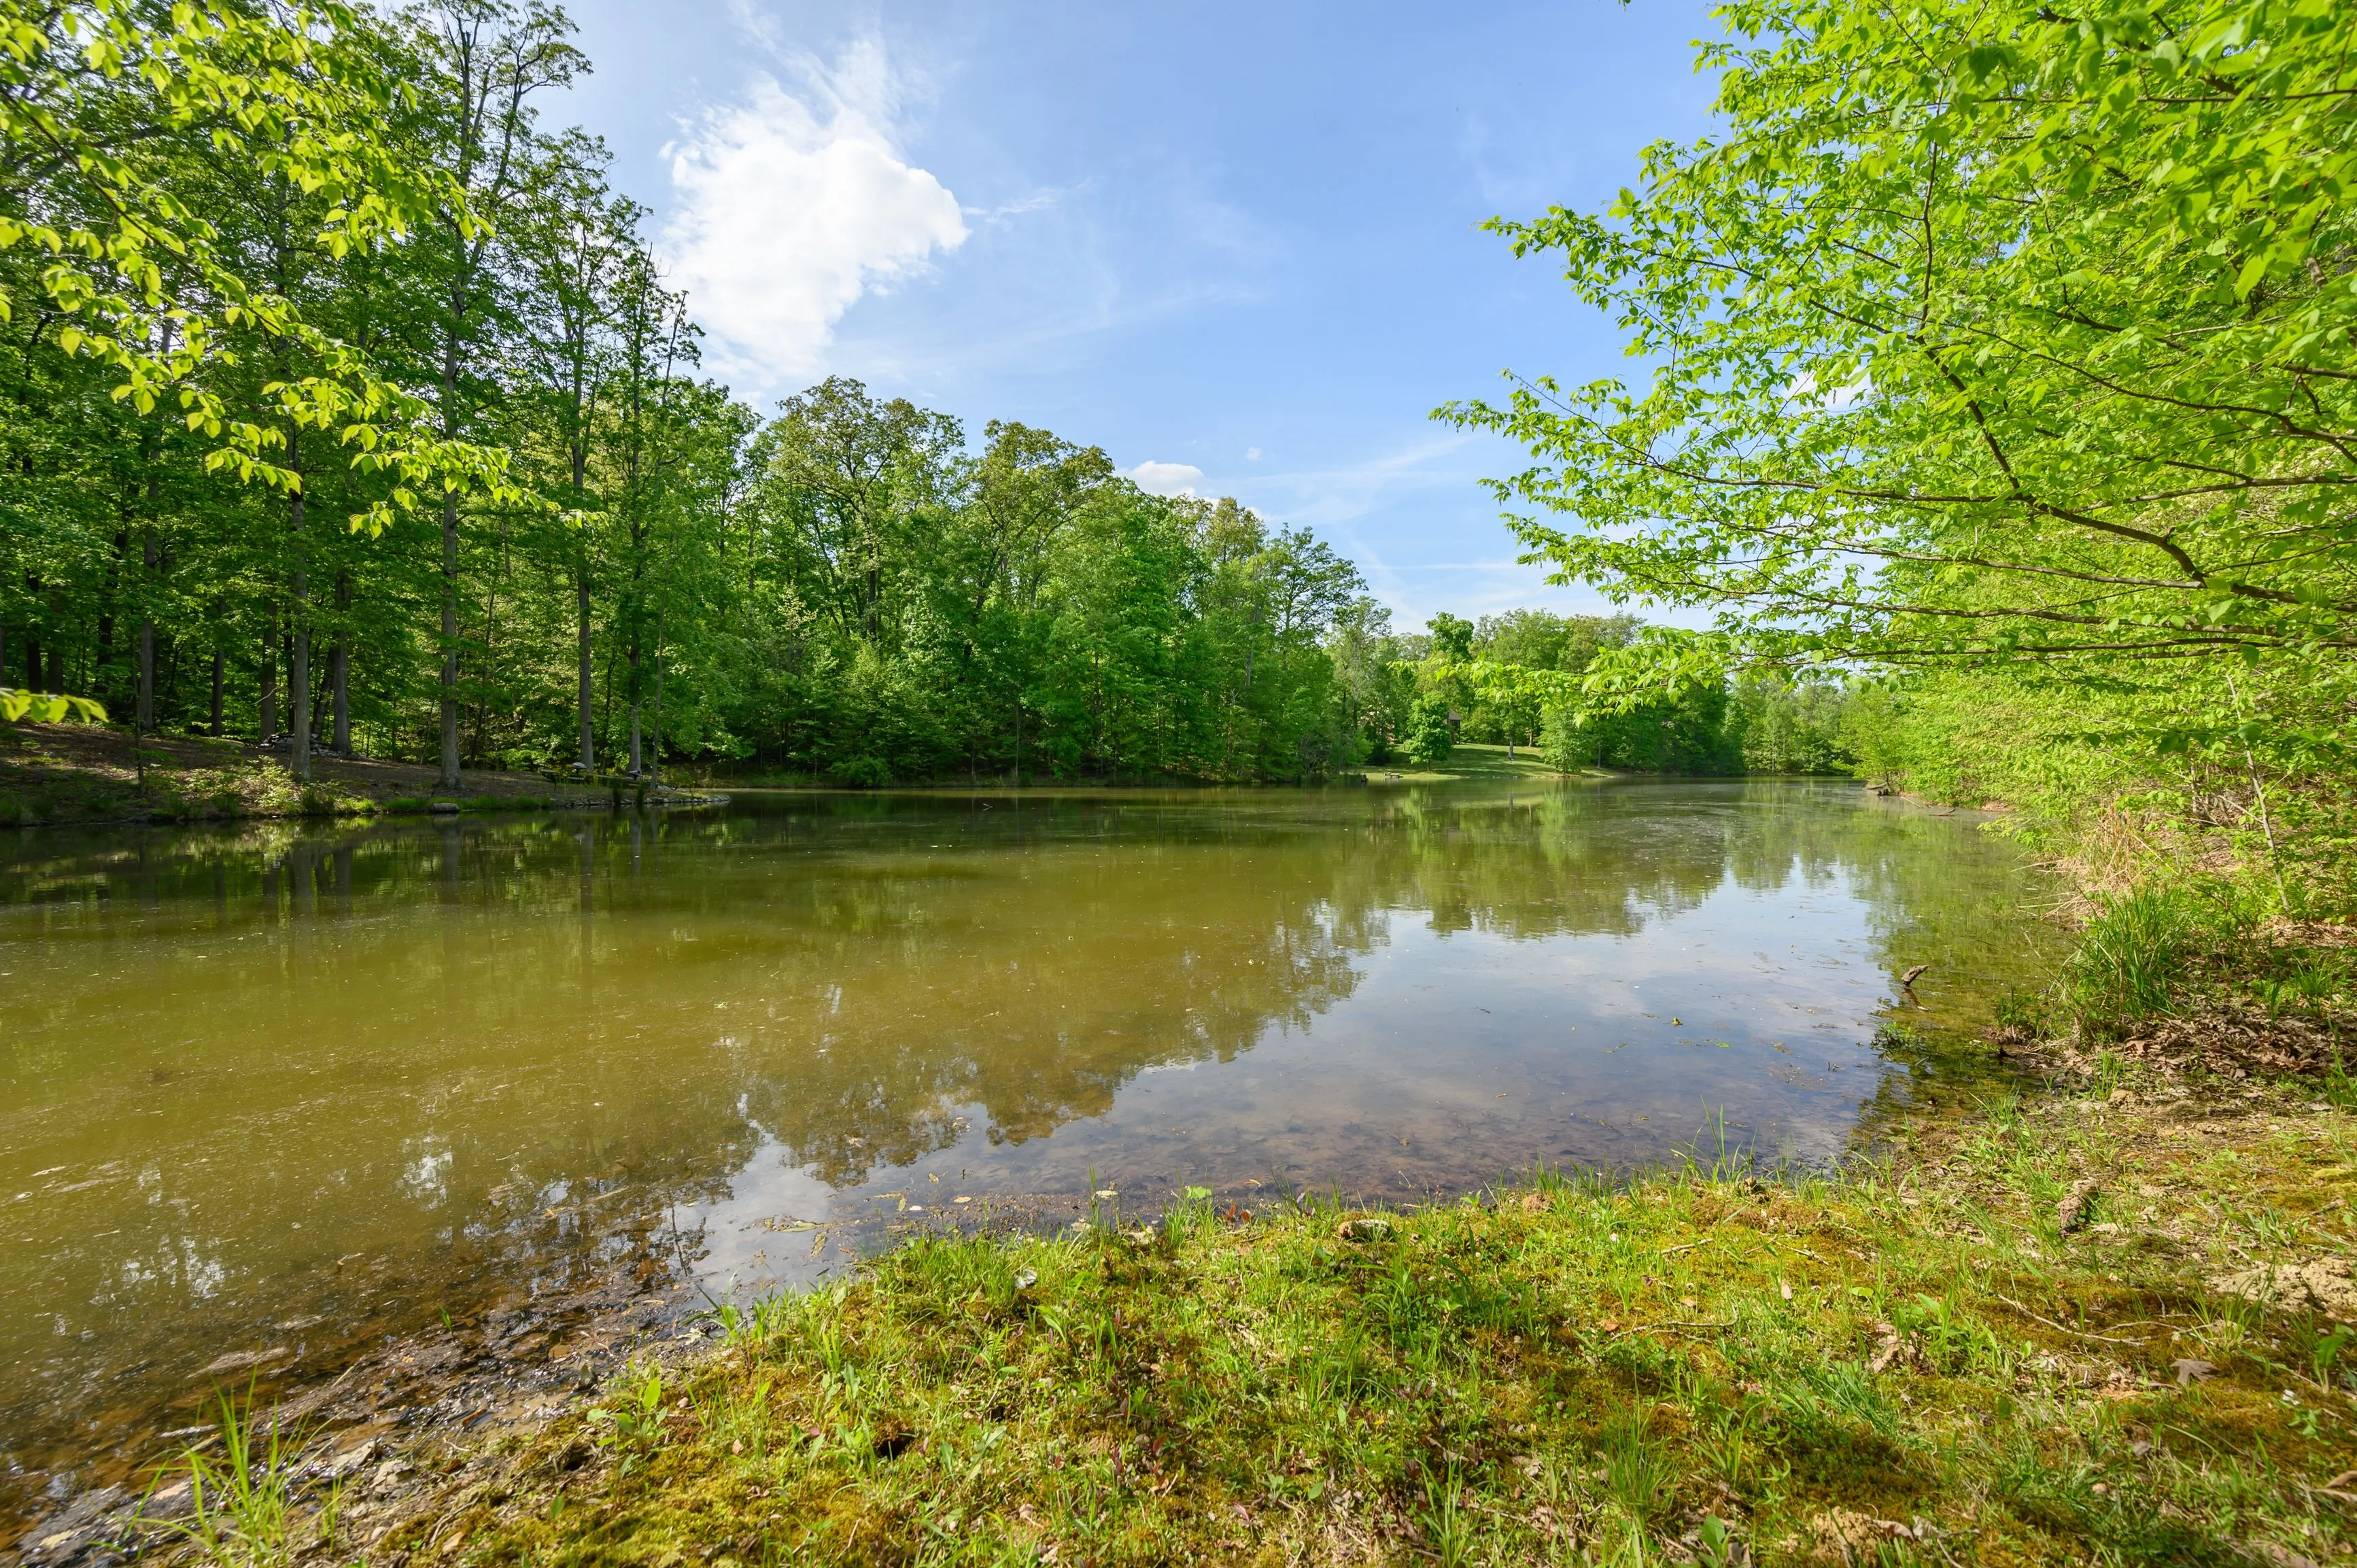 A serene pond surrounded by lush greenery and trees with reflections visible in the calm water, set against a clear blue sky with scattered clouds.